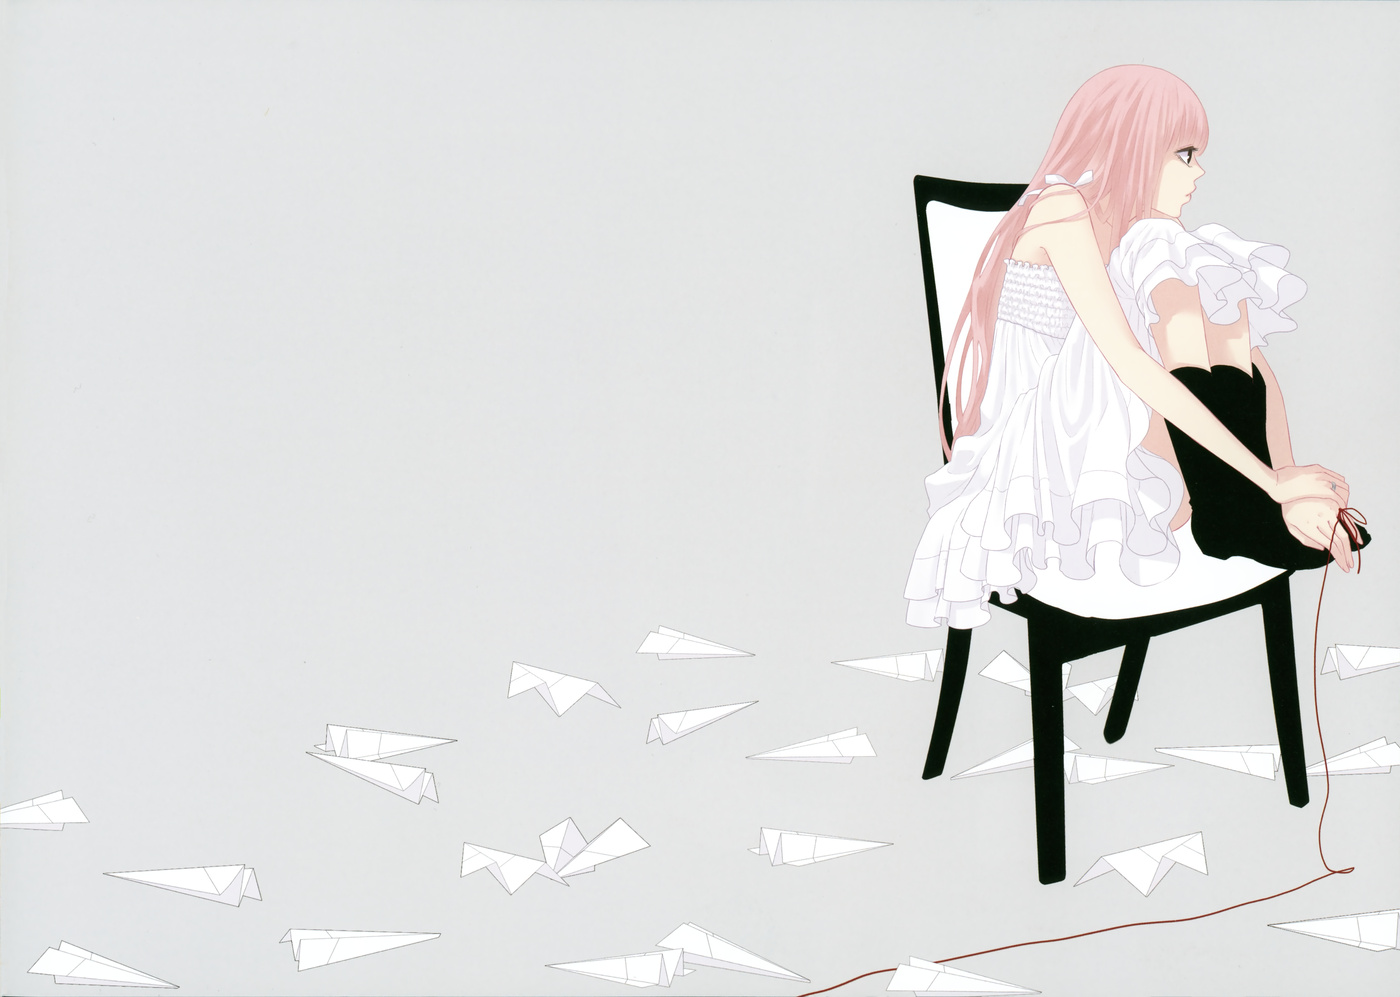 Just Be Friends Image by Mitosa #155445 - Zerochan Anime Image Board